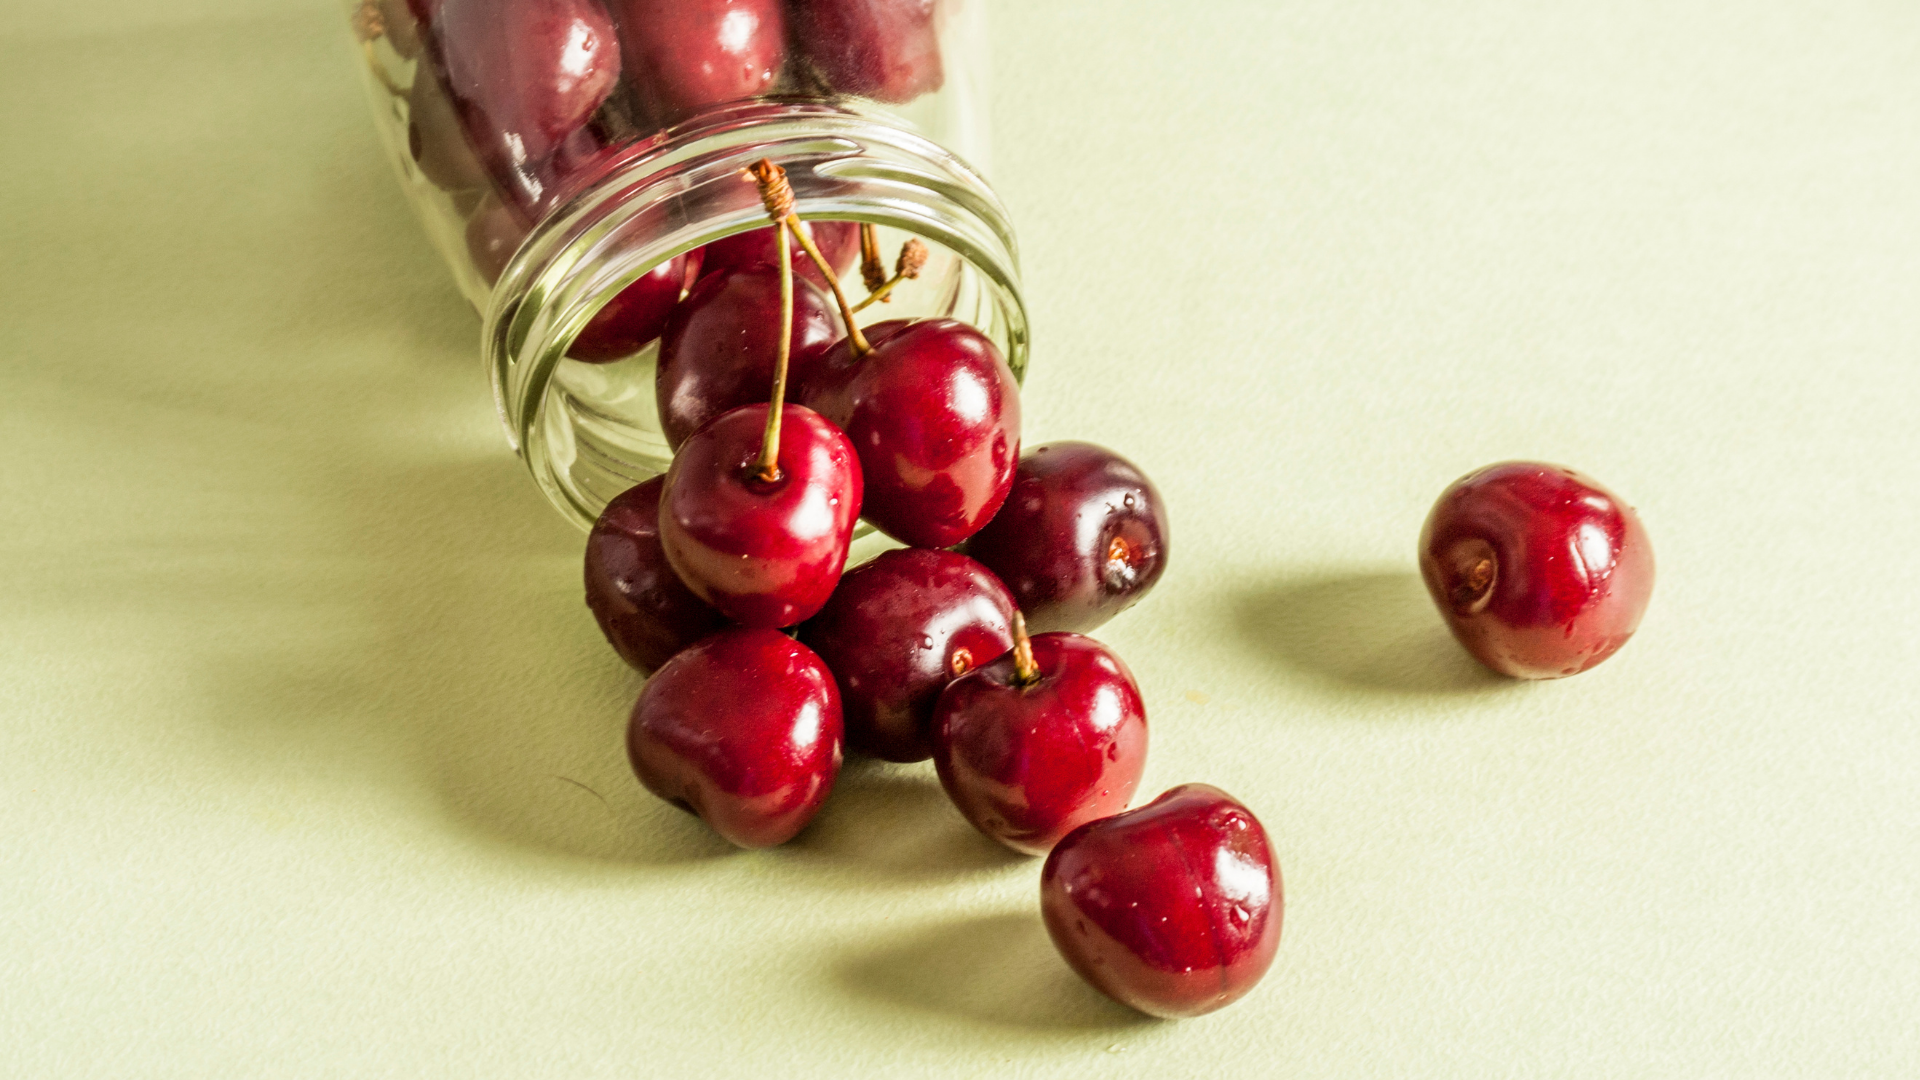 red cherries falling out of glass jar on cream background